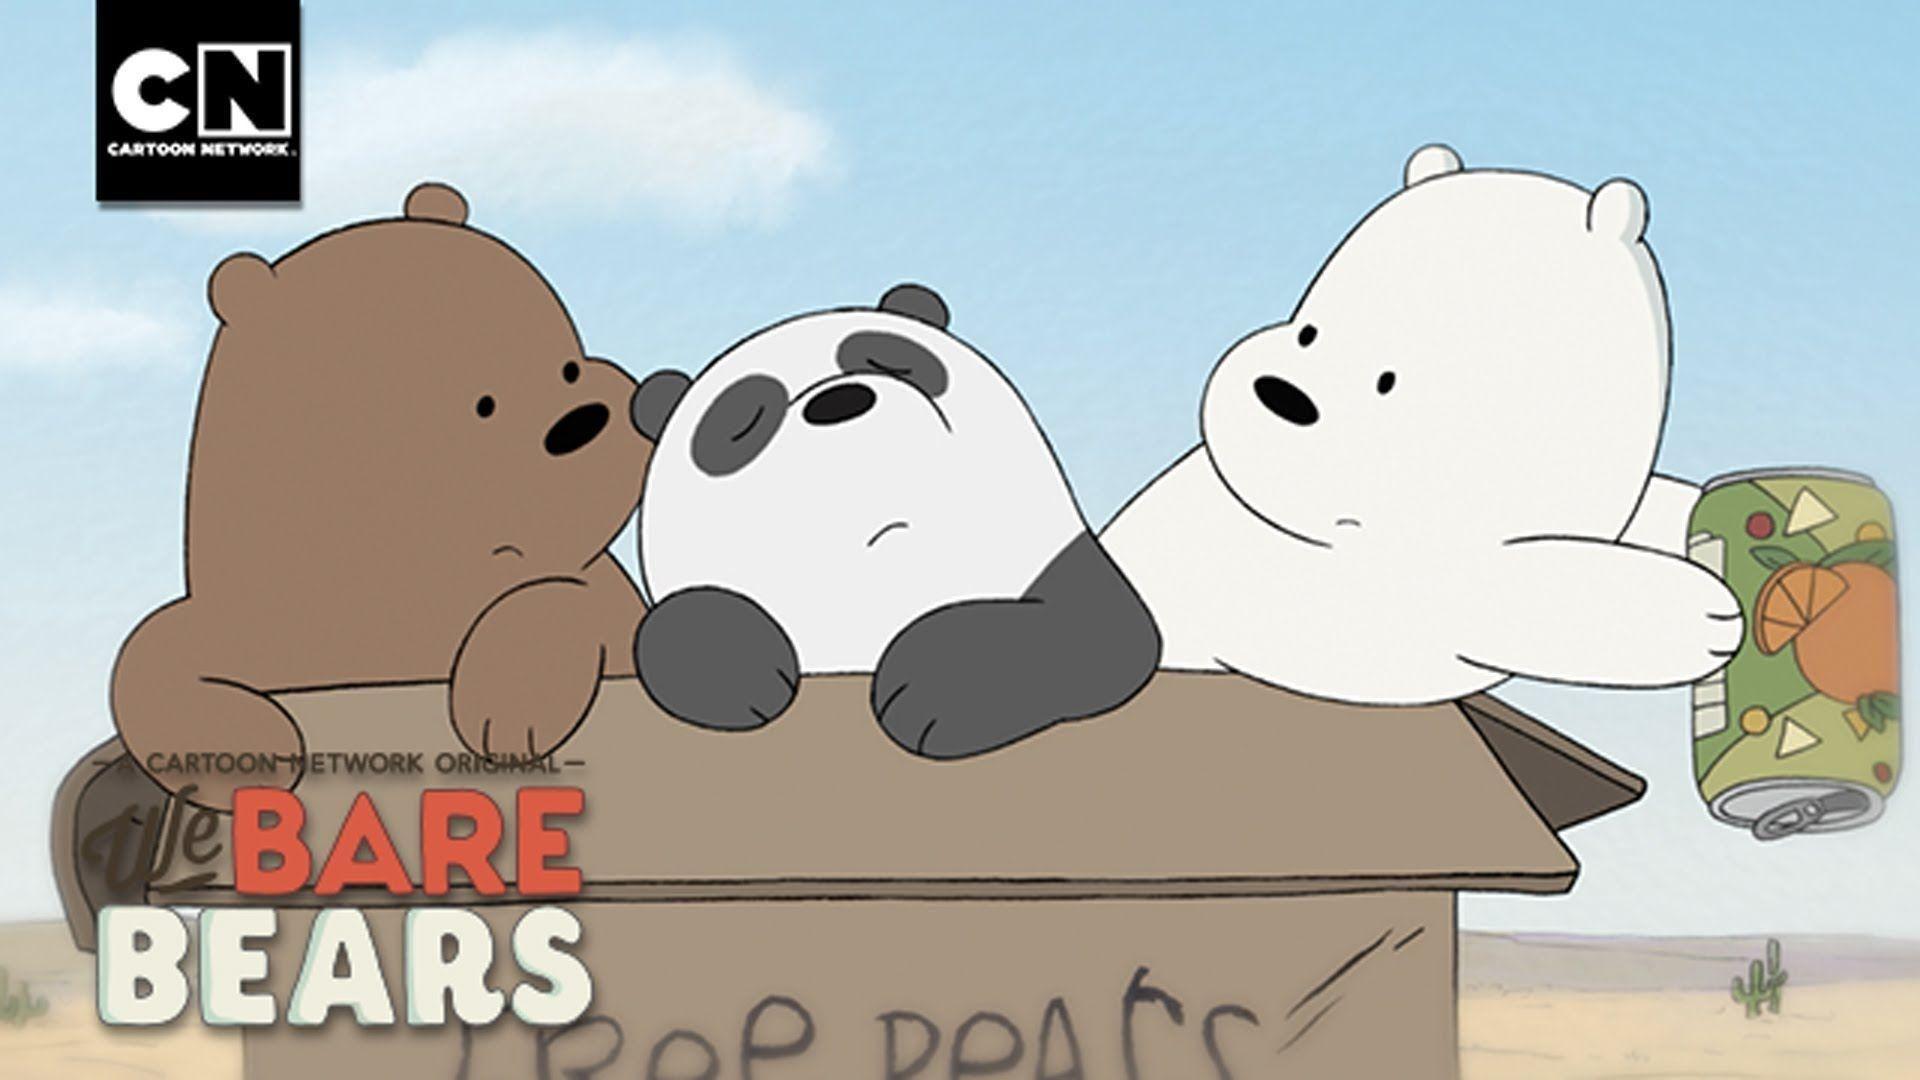 Best image about We Bare Bears. Panda